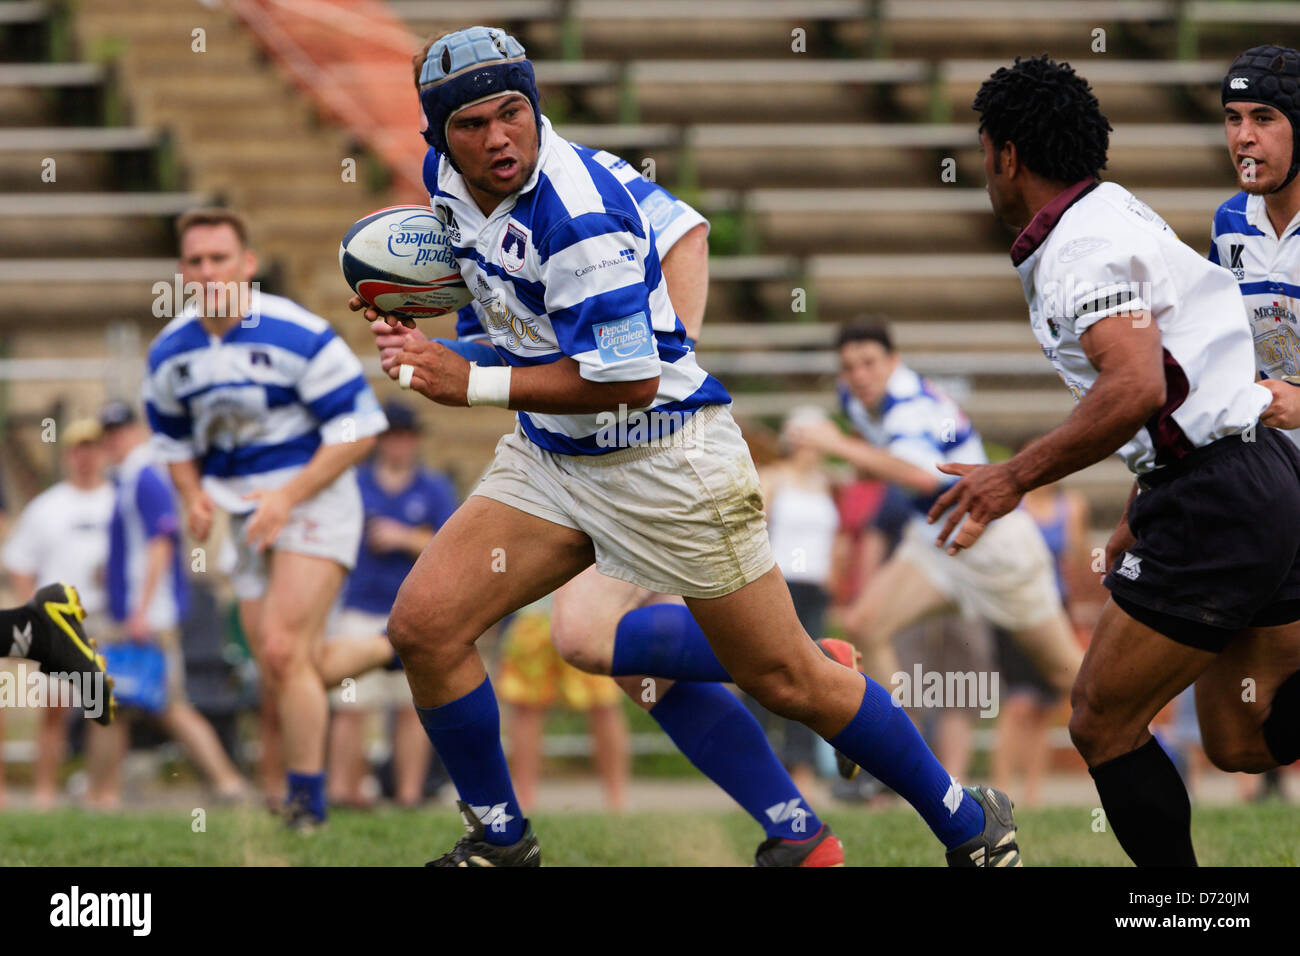 A Washington Rugby Football club player carries the ball during a match at Cardozo High School field. Stock Photo